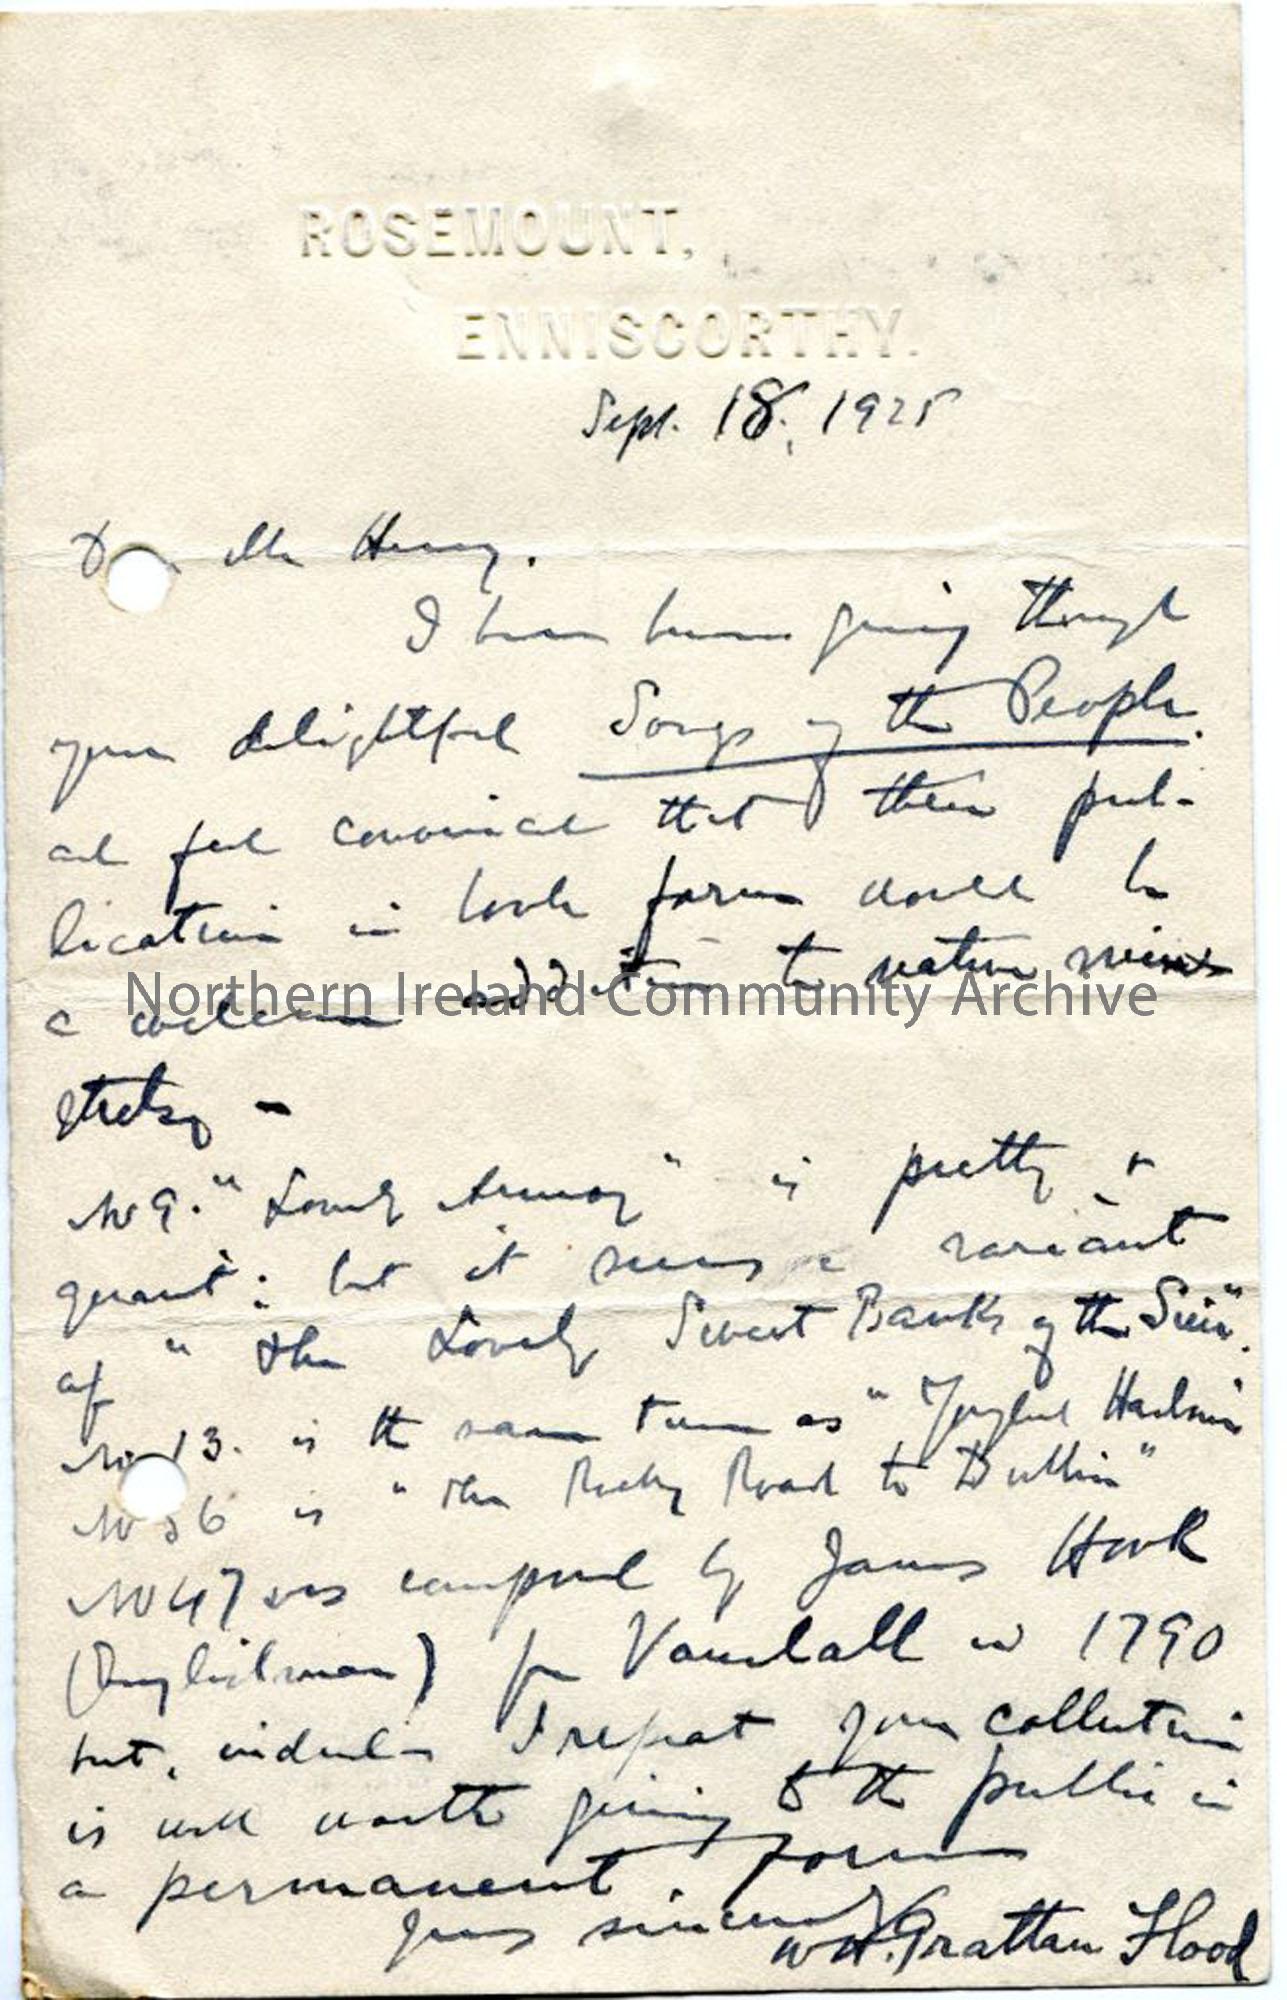 Letter from W H Grattan Flood, dated 18.9.1925